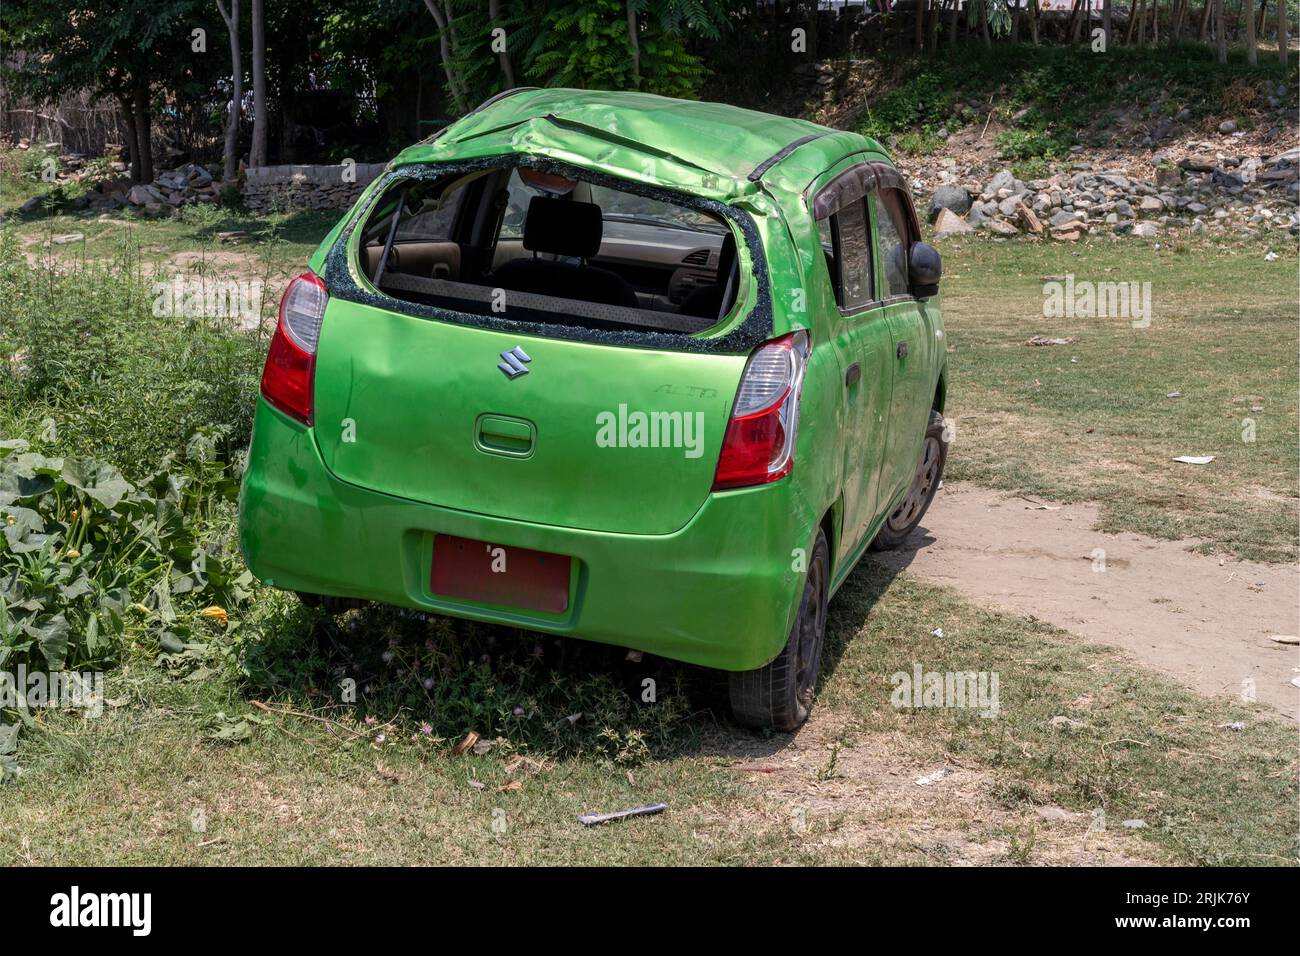 Suzuki alto car totally destroyed in a road accident: Swat,Pakistan - June 10, 2023. Stock Photo